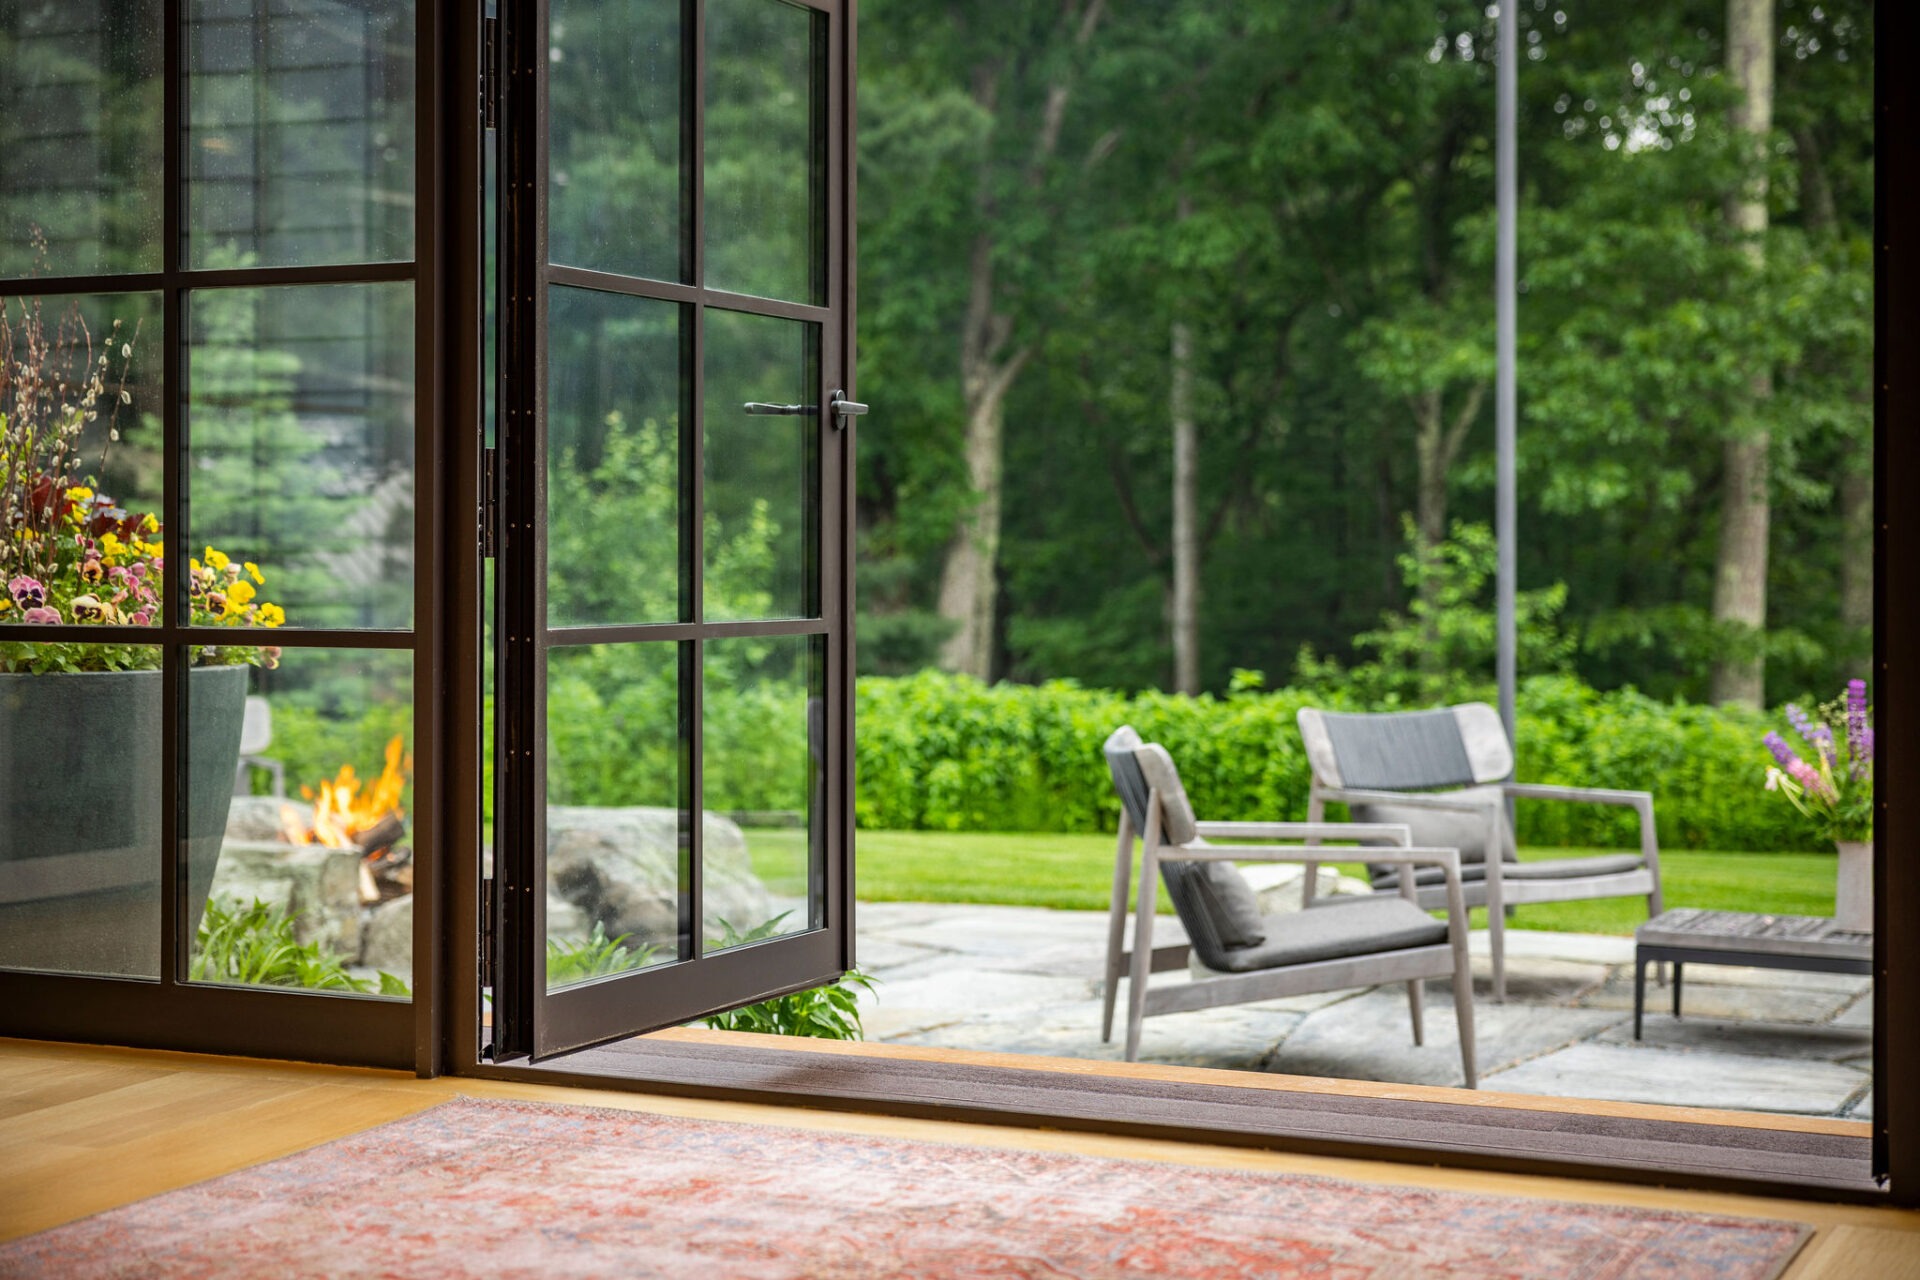 This image shows a peaceful outdoor patio view through an open glass door. Comfortable furniture, a lit fire pit, and lush greenery create a serene scene.